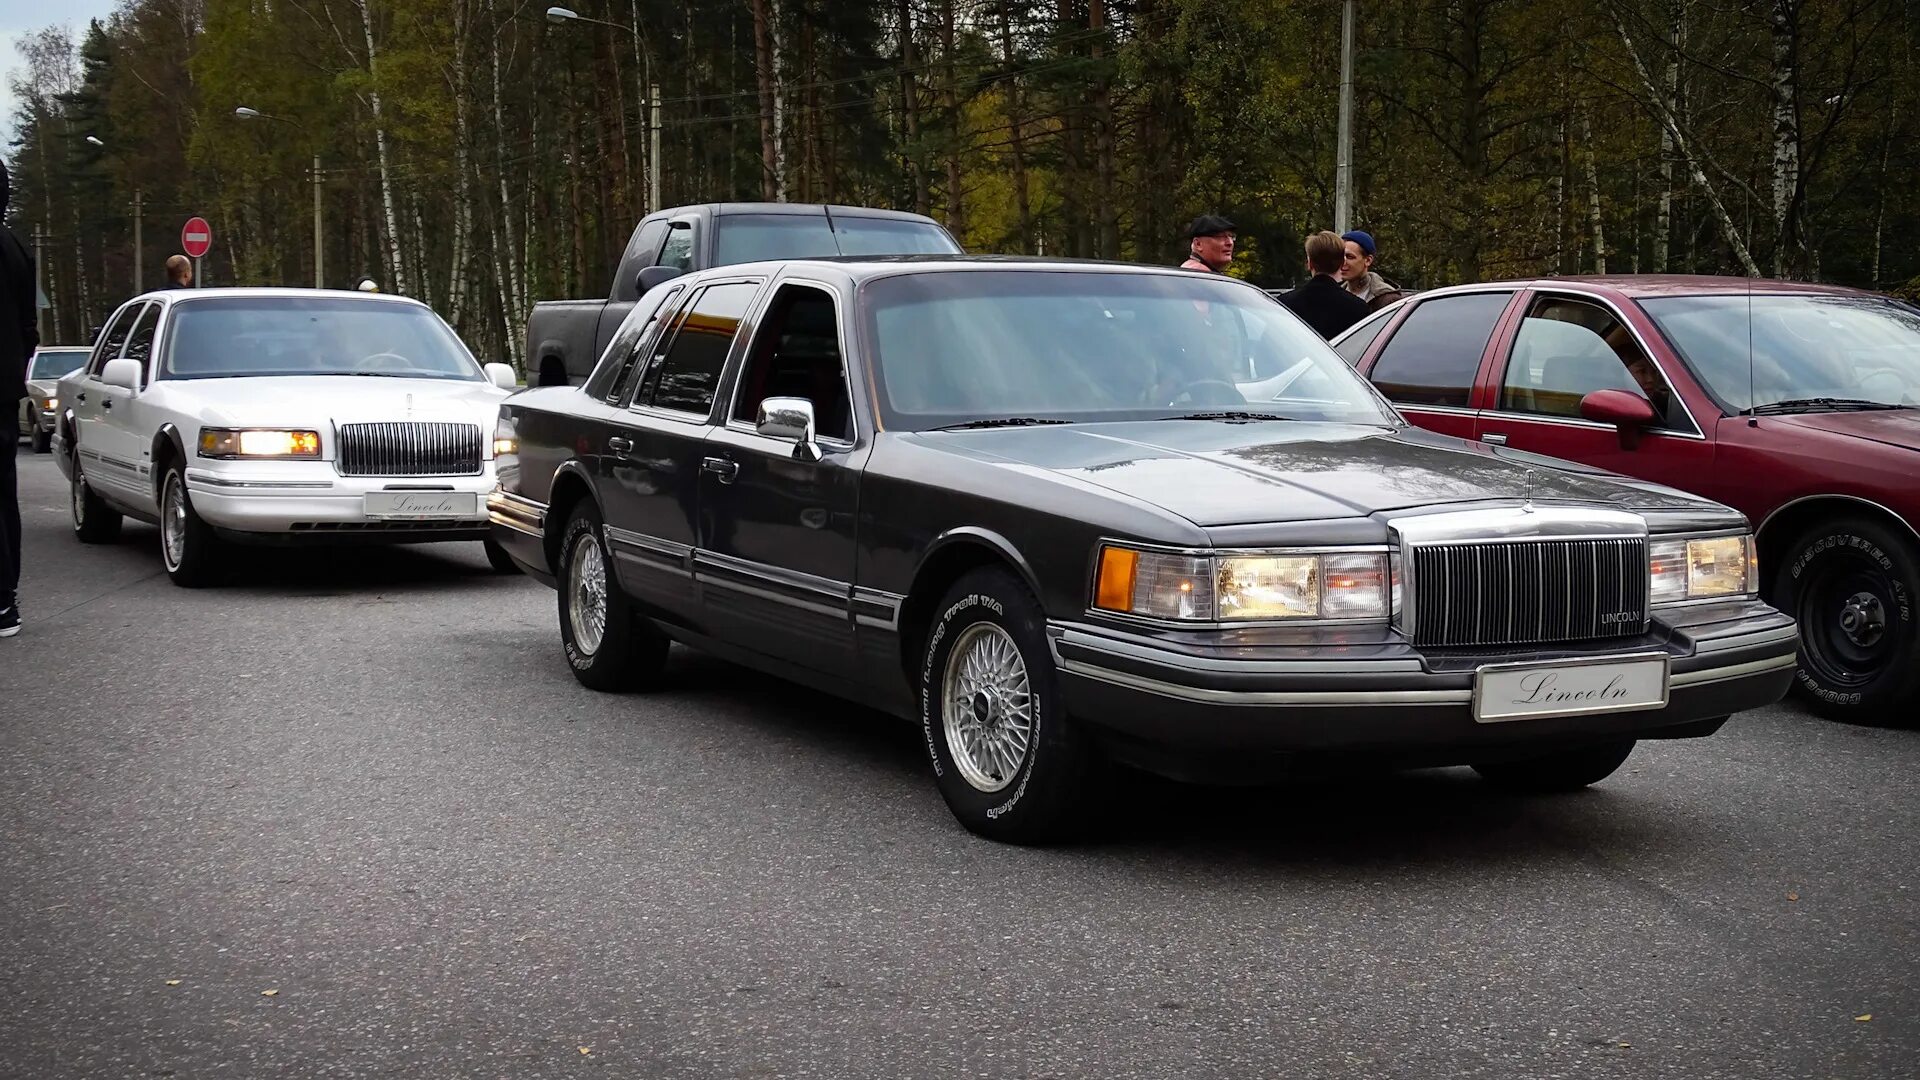 Таун кар 2. Lincoln Town car 2. Lincoln Town car 1994. Lincoln Town car 1993. Lincoln Town car 1990.